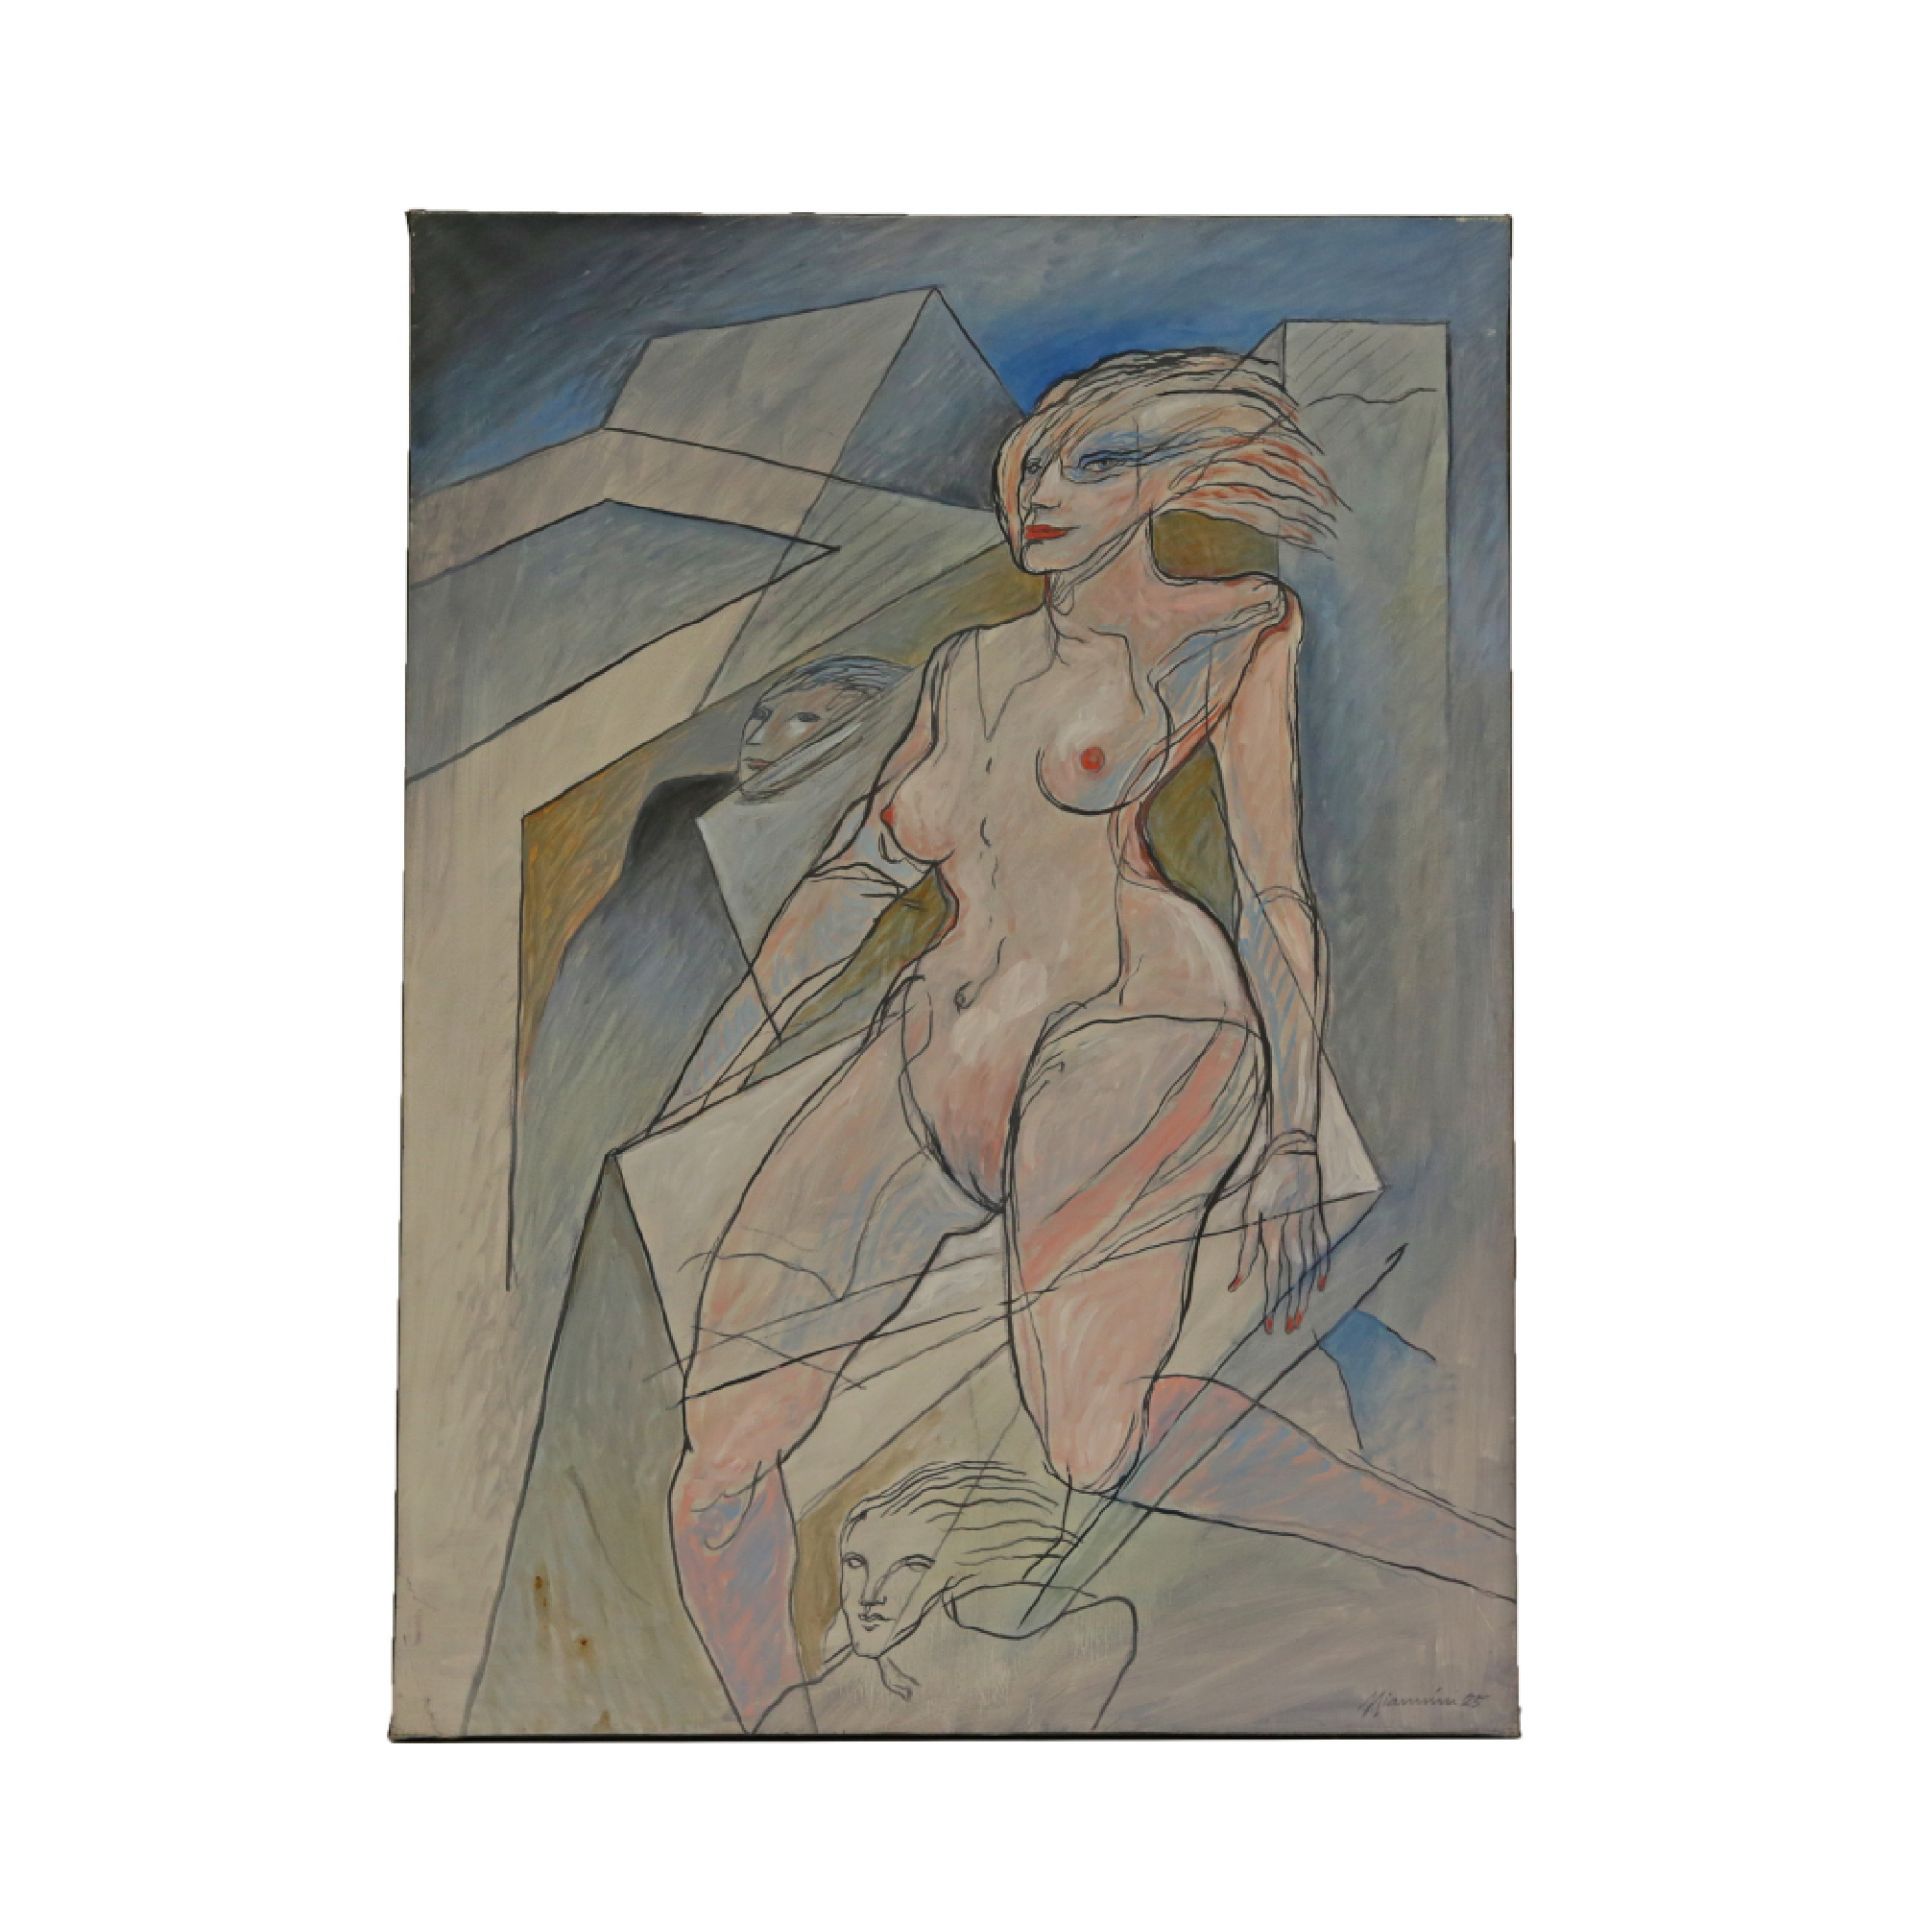 Female nude 1985, oil on canvas, signed by the artist in the lower right corner of Miannini.